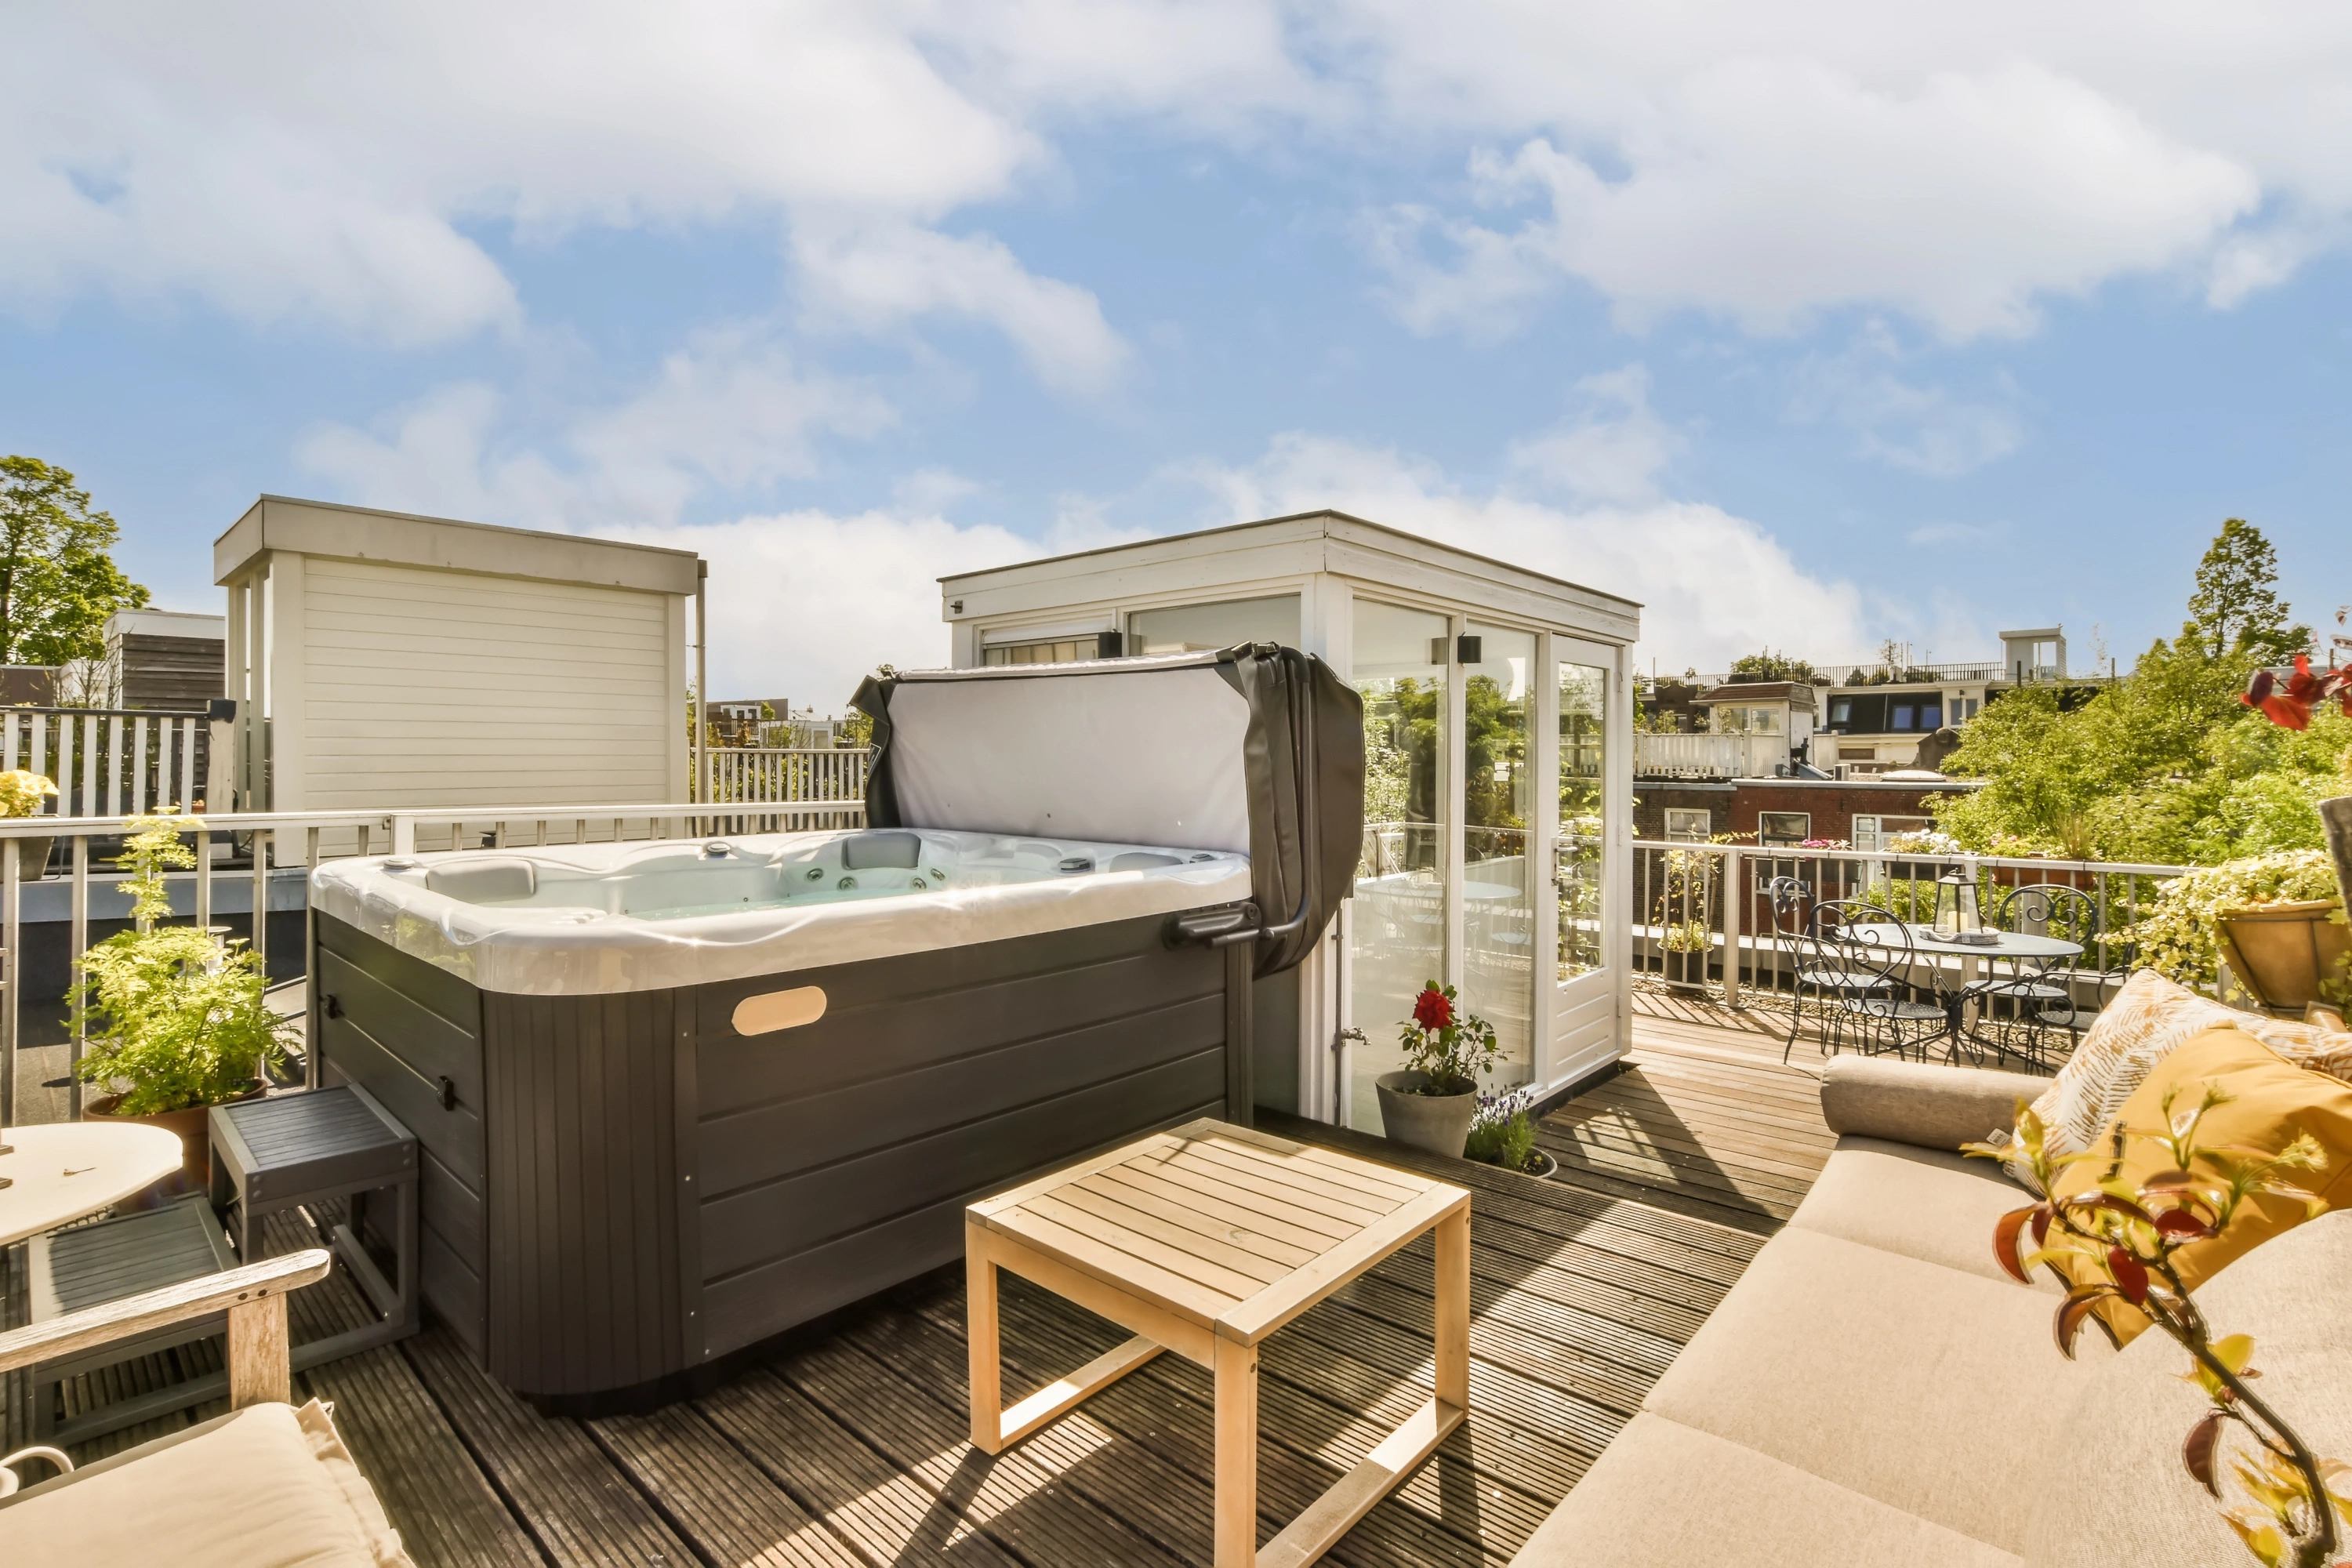 Creating a Zen Oasis: Feng Shui Principles For Your Hot Tub Outdoor Space